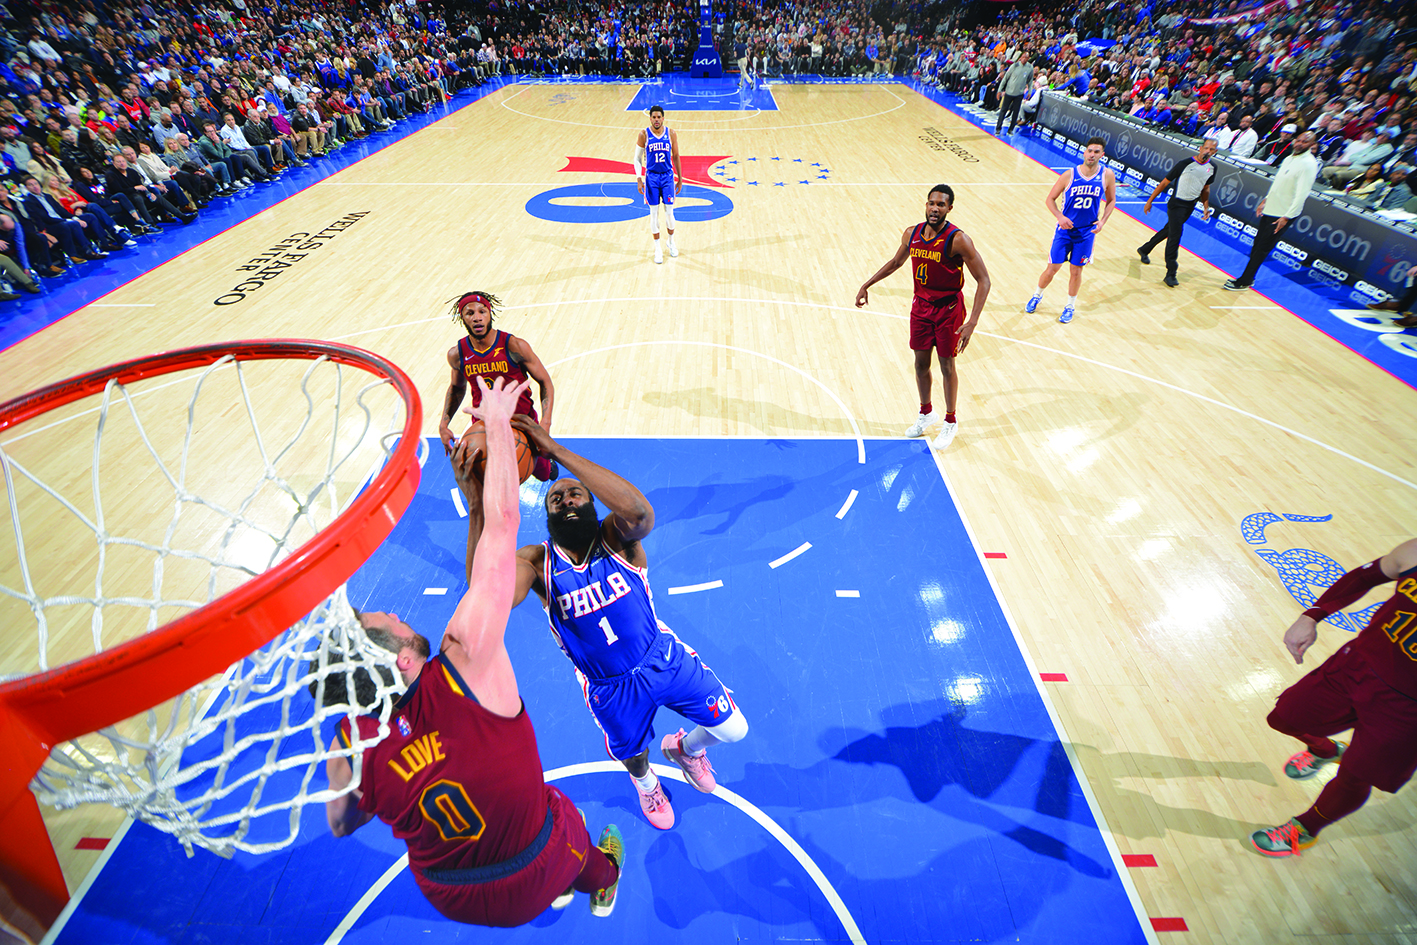 PHILADELPHIA: James Harden #1 of the Philadelphia 76ers shoots the ball against the Cleveland Cavaliers on March 4, 2022 at Wells Fargo Center in Philadelphia. - AFP n